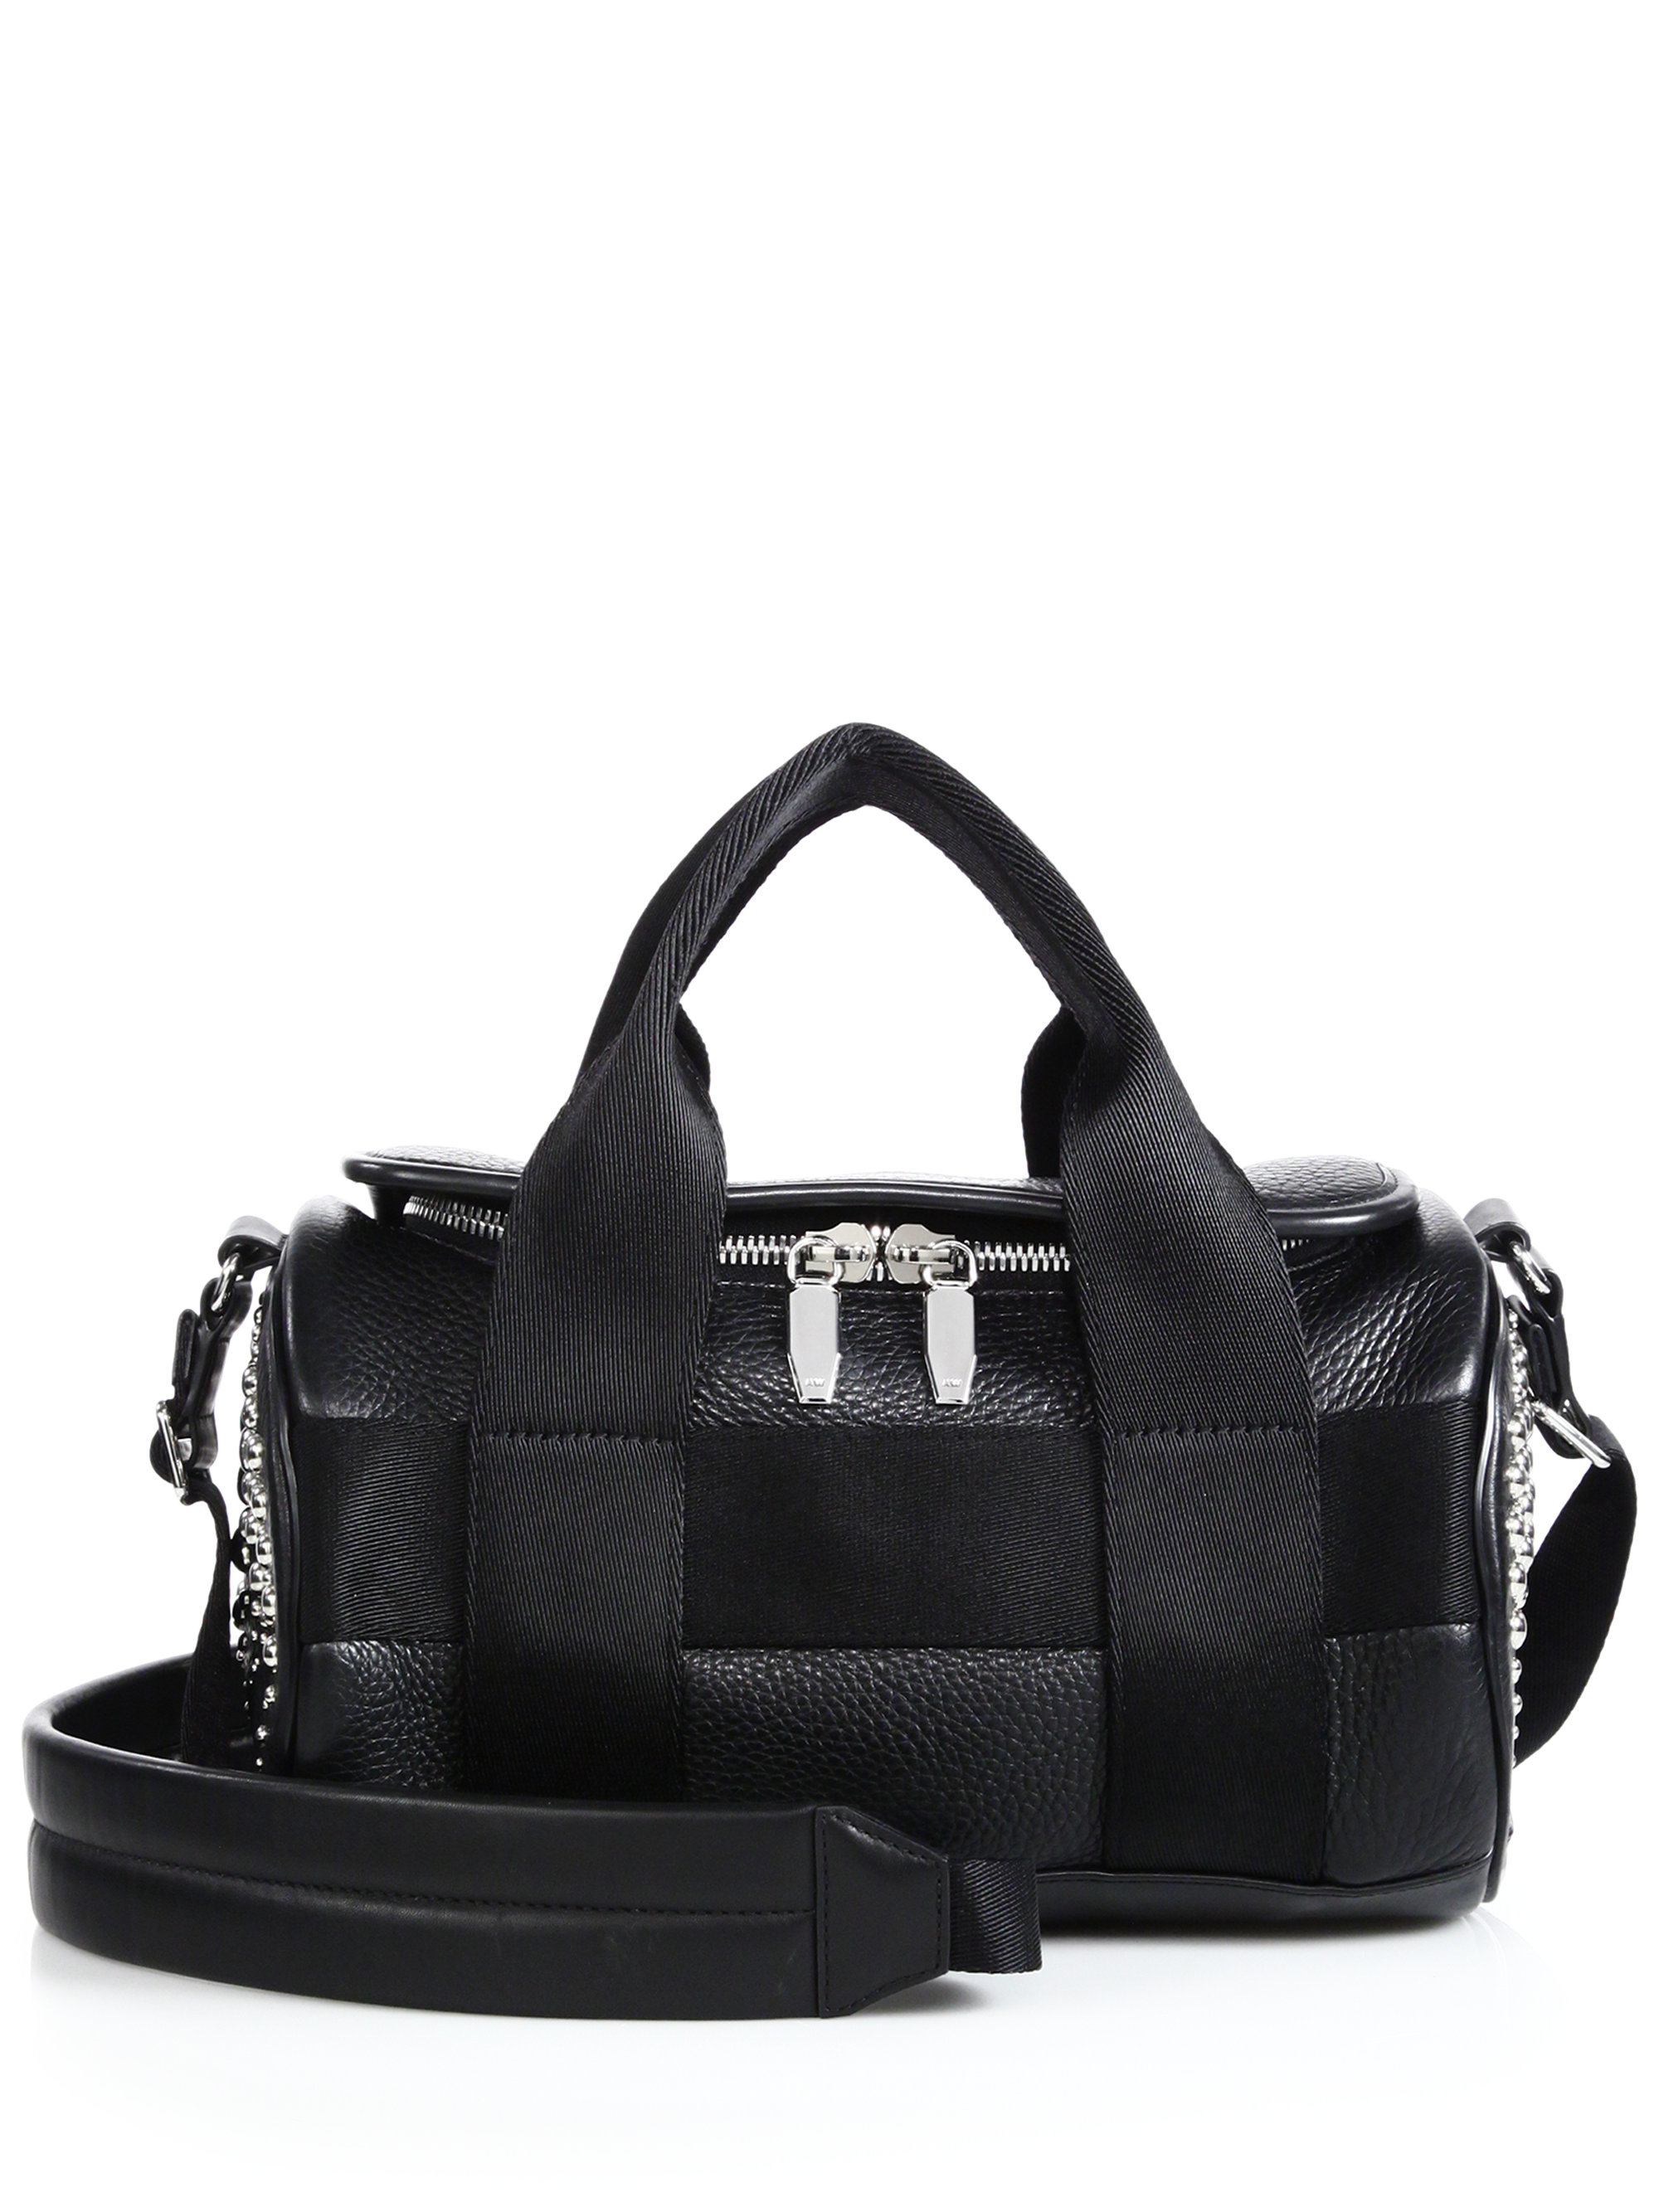 Lyst - Alexander wang Studded Nylon-trimmed Leather Duffel Bag in Black